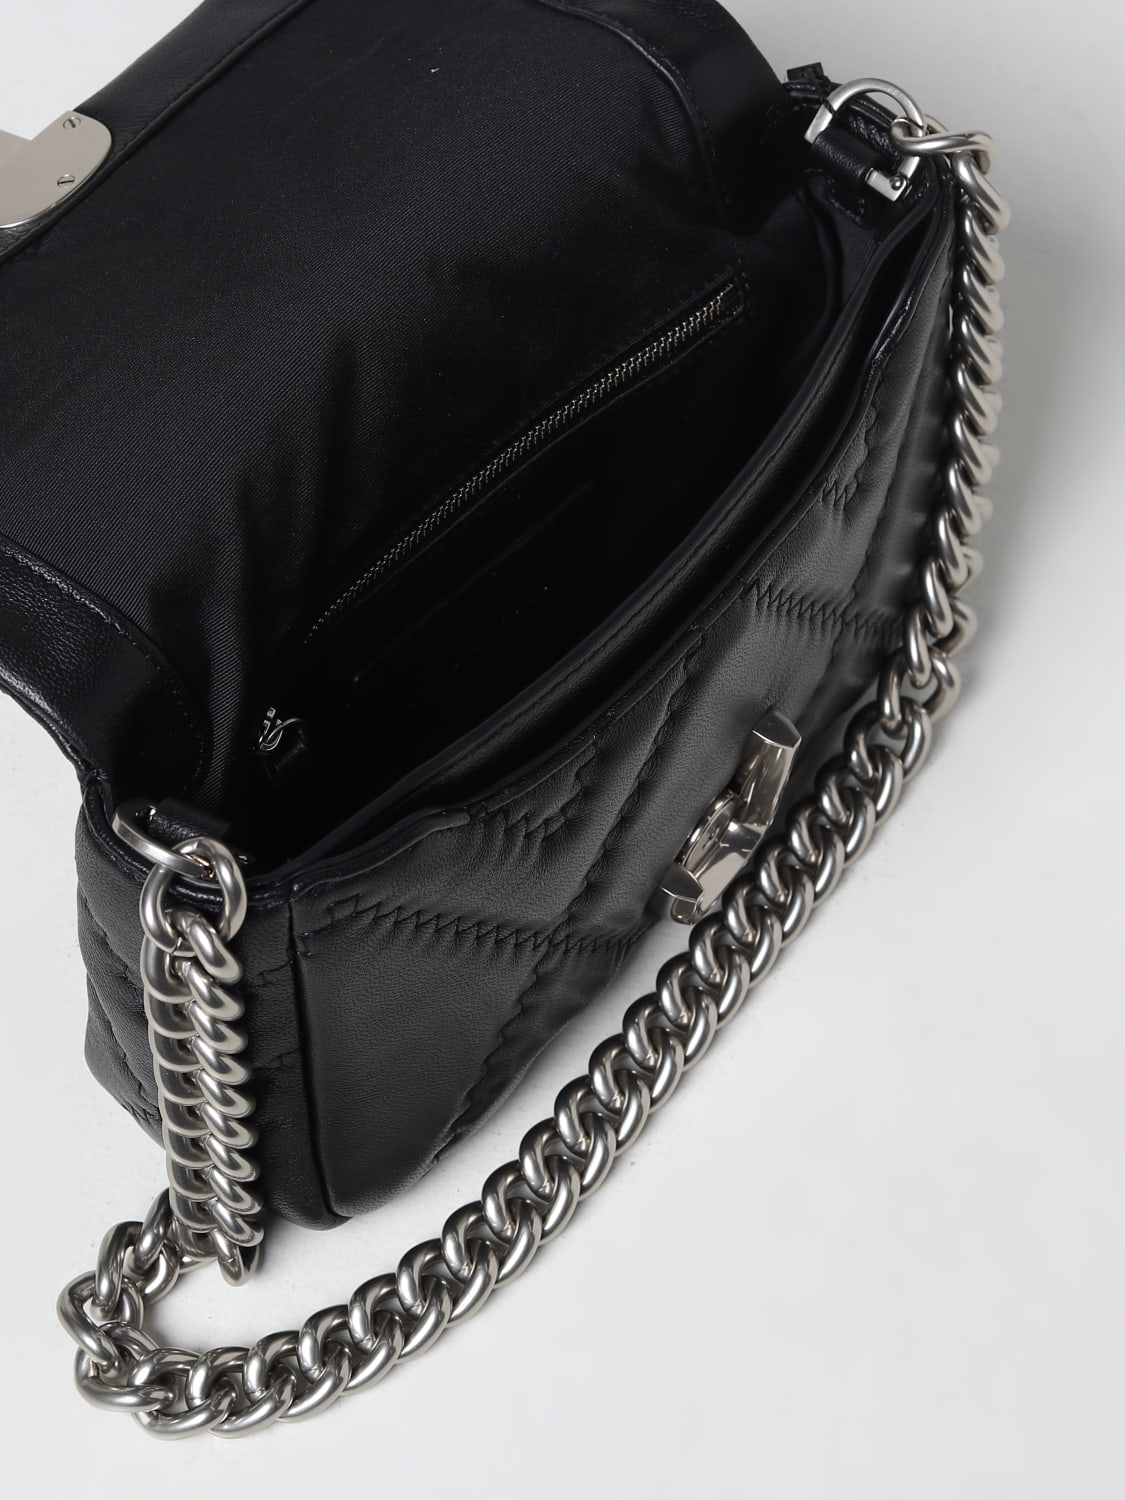 MARC JACOBS: crossbody bags for woman - Black  Marc Jacobs crossbody bags  2S3HSH007H03 online at